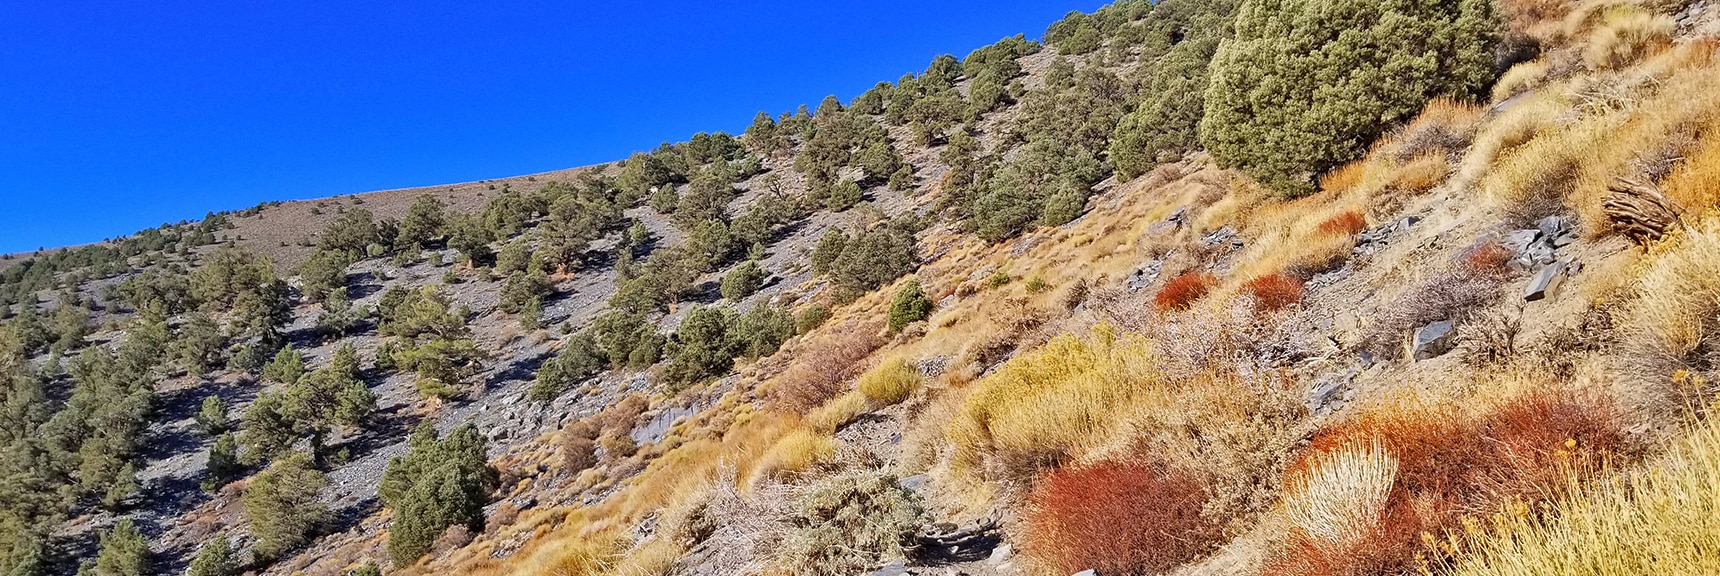 Trees Dramatically Thin Out Rounding South Side of Rogers Peak | Telescope Peak Summit from Wildrose Charcoal Kilns Parking Area, Panamint Mountains, Death Valley National Park, California